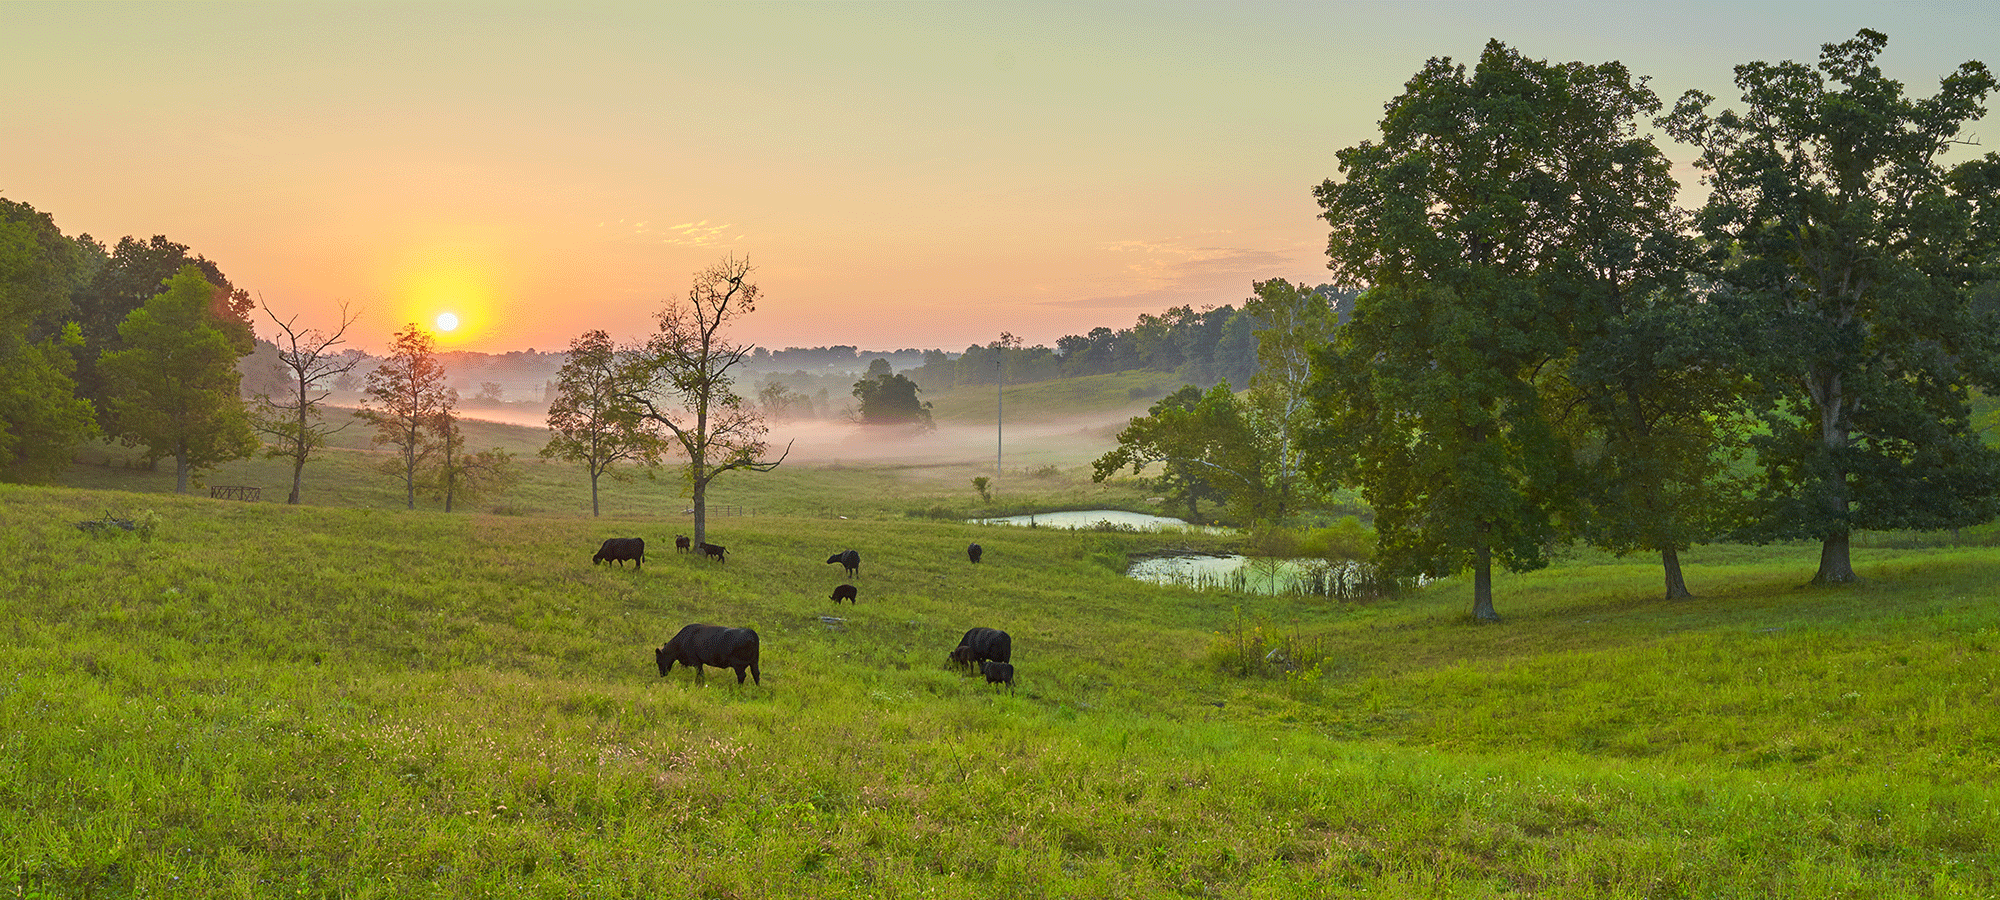 Cows grazing in a green pasture at sunrise